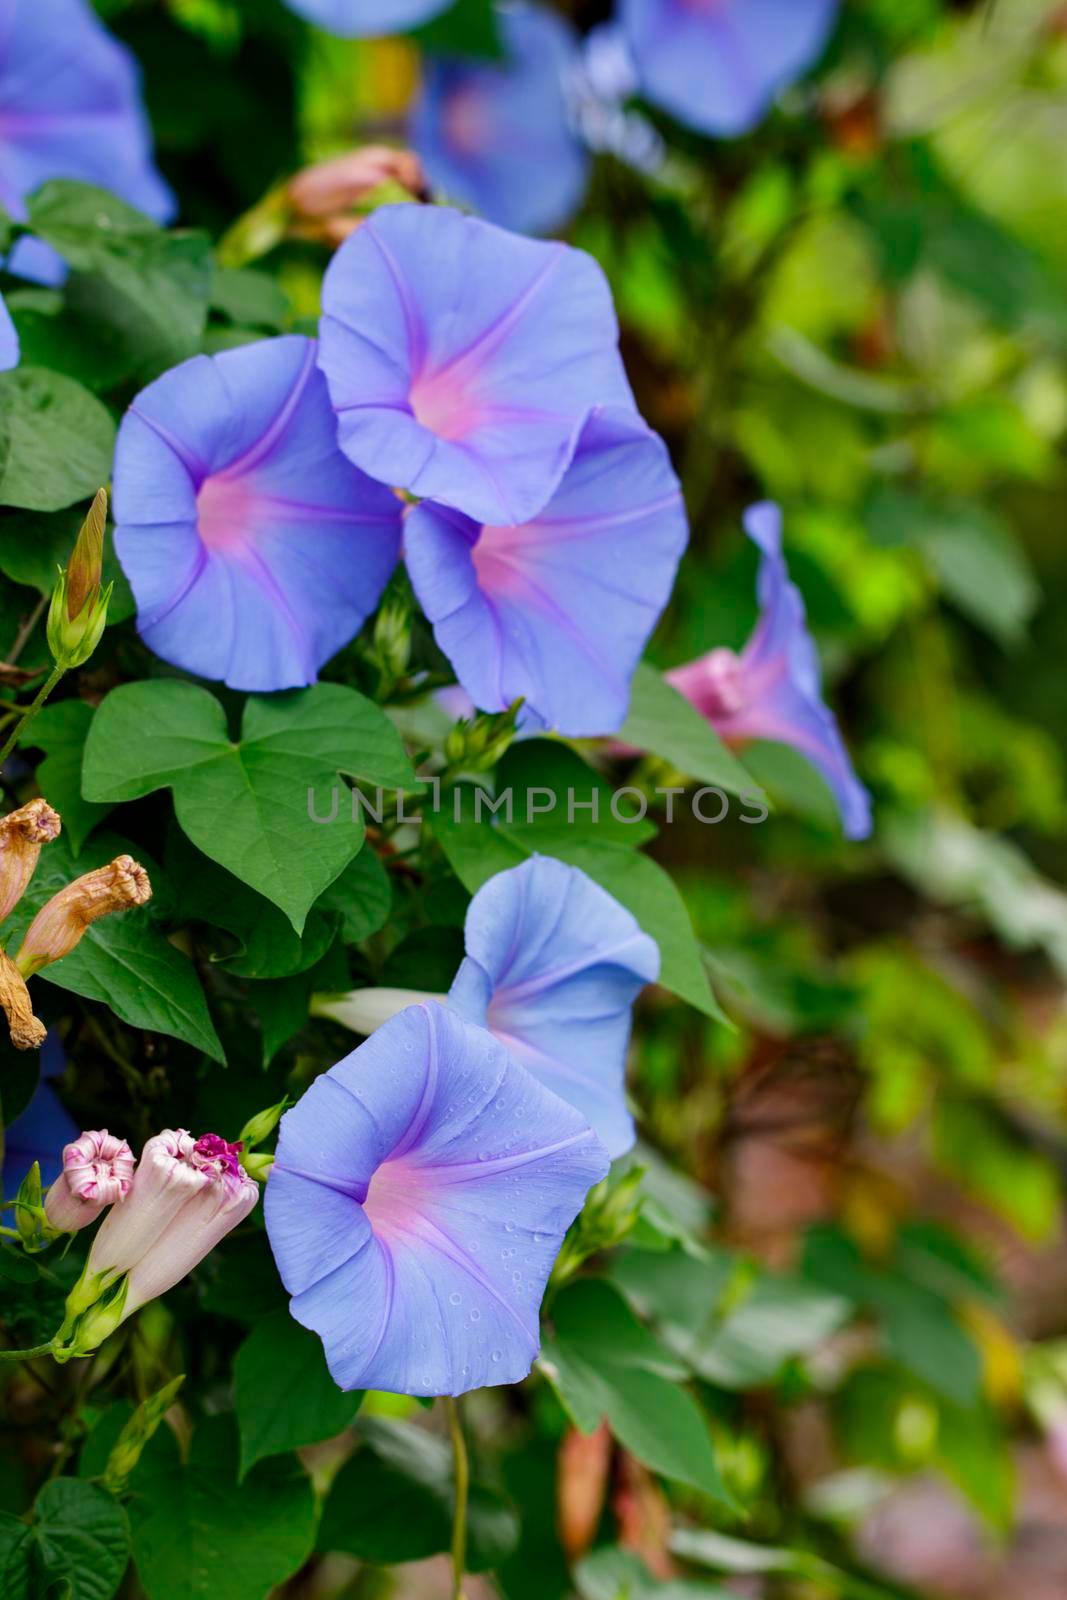 Image of morning glory (Ipomoea) flowers on nature background.